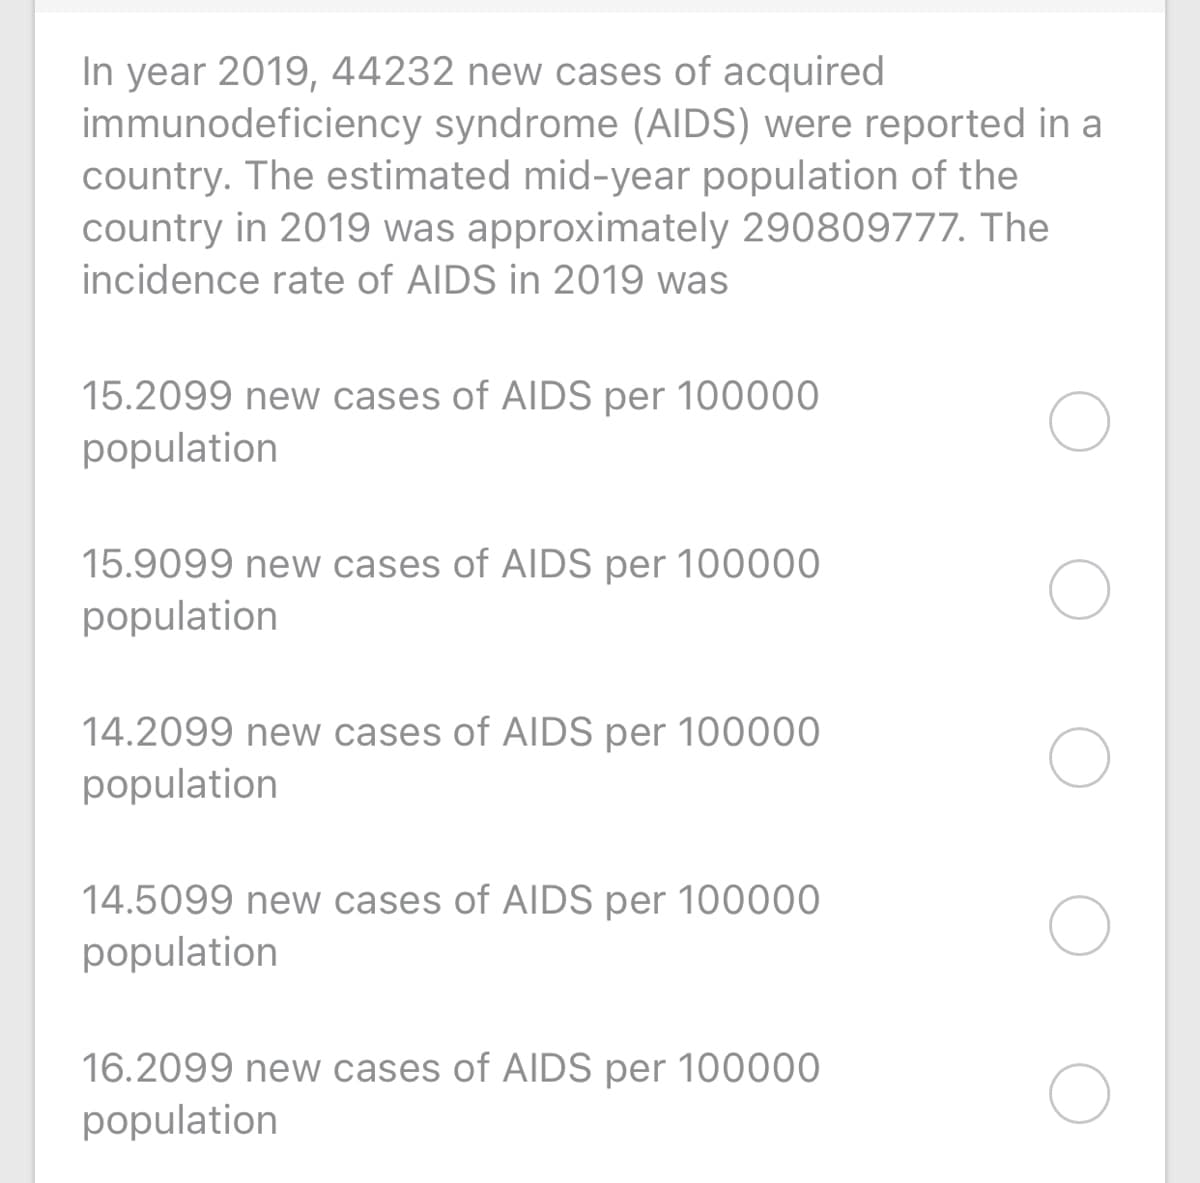 In year 2019, 44232 new cases of acquired
immunodeficiency syndrome (AIDS) were reported in a
country. The estimated mid-year population of the
country in 2019 was approximately 290809777. The
incidence rate of AIDS in 2019 was
15.2099 new cases of AIDS per 100000
population
15.9099 new cases of AIDS per 100000
population
14.2099 new cases of AIDS per 100000
population
14.5099 new cases of AIDS per 100000
population
16.2099 new cases of AIDS per 10000O
population
